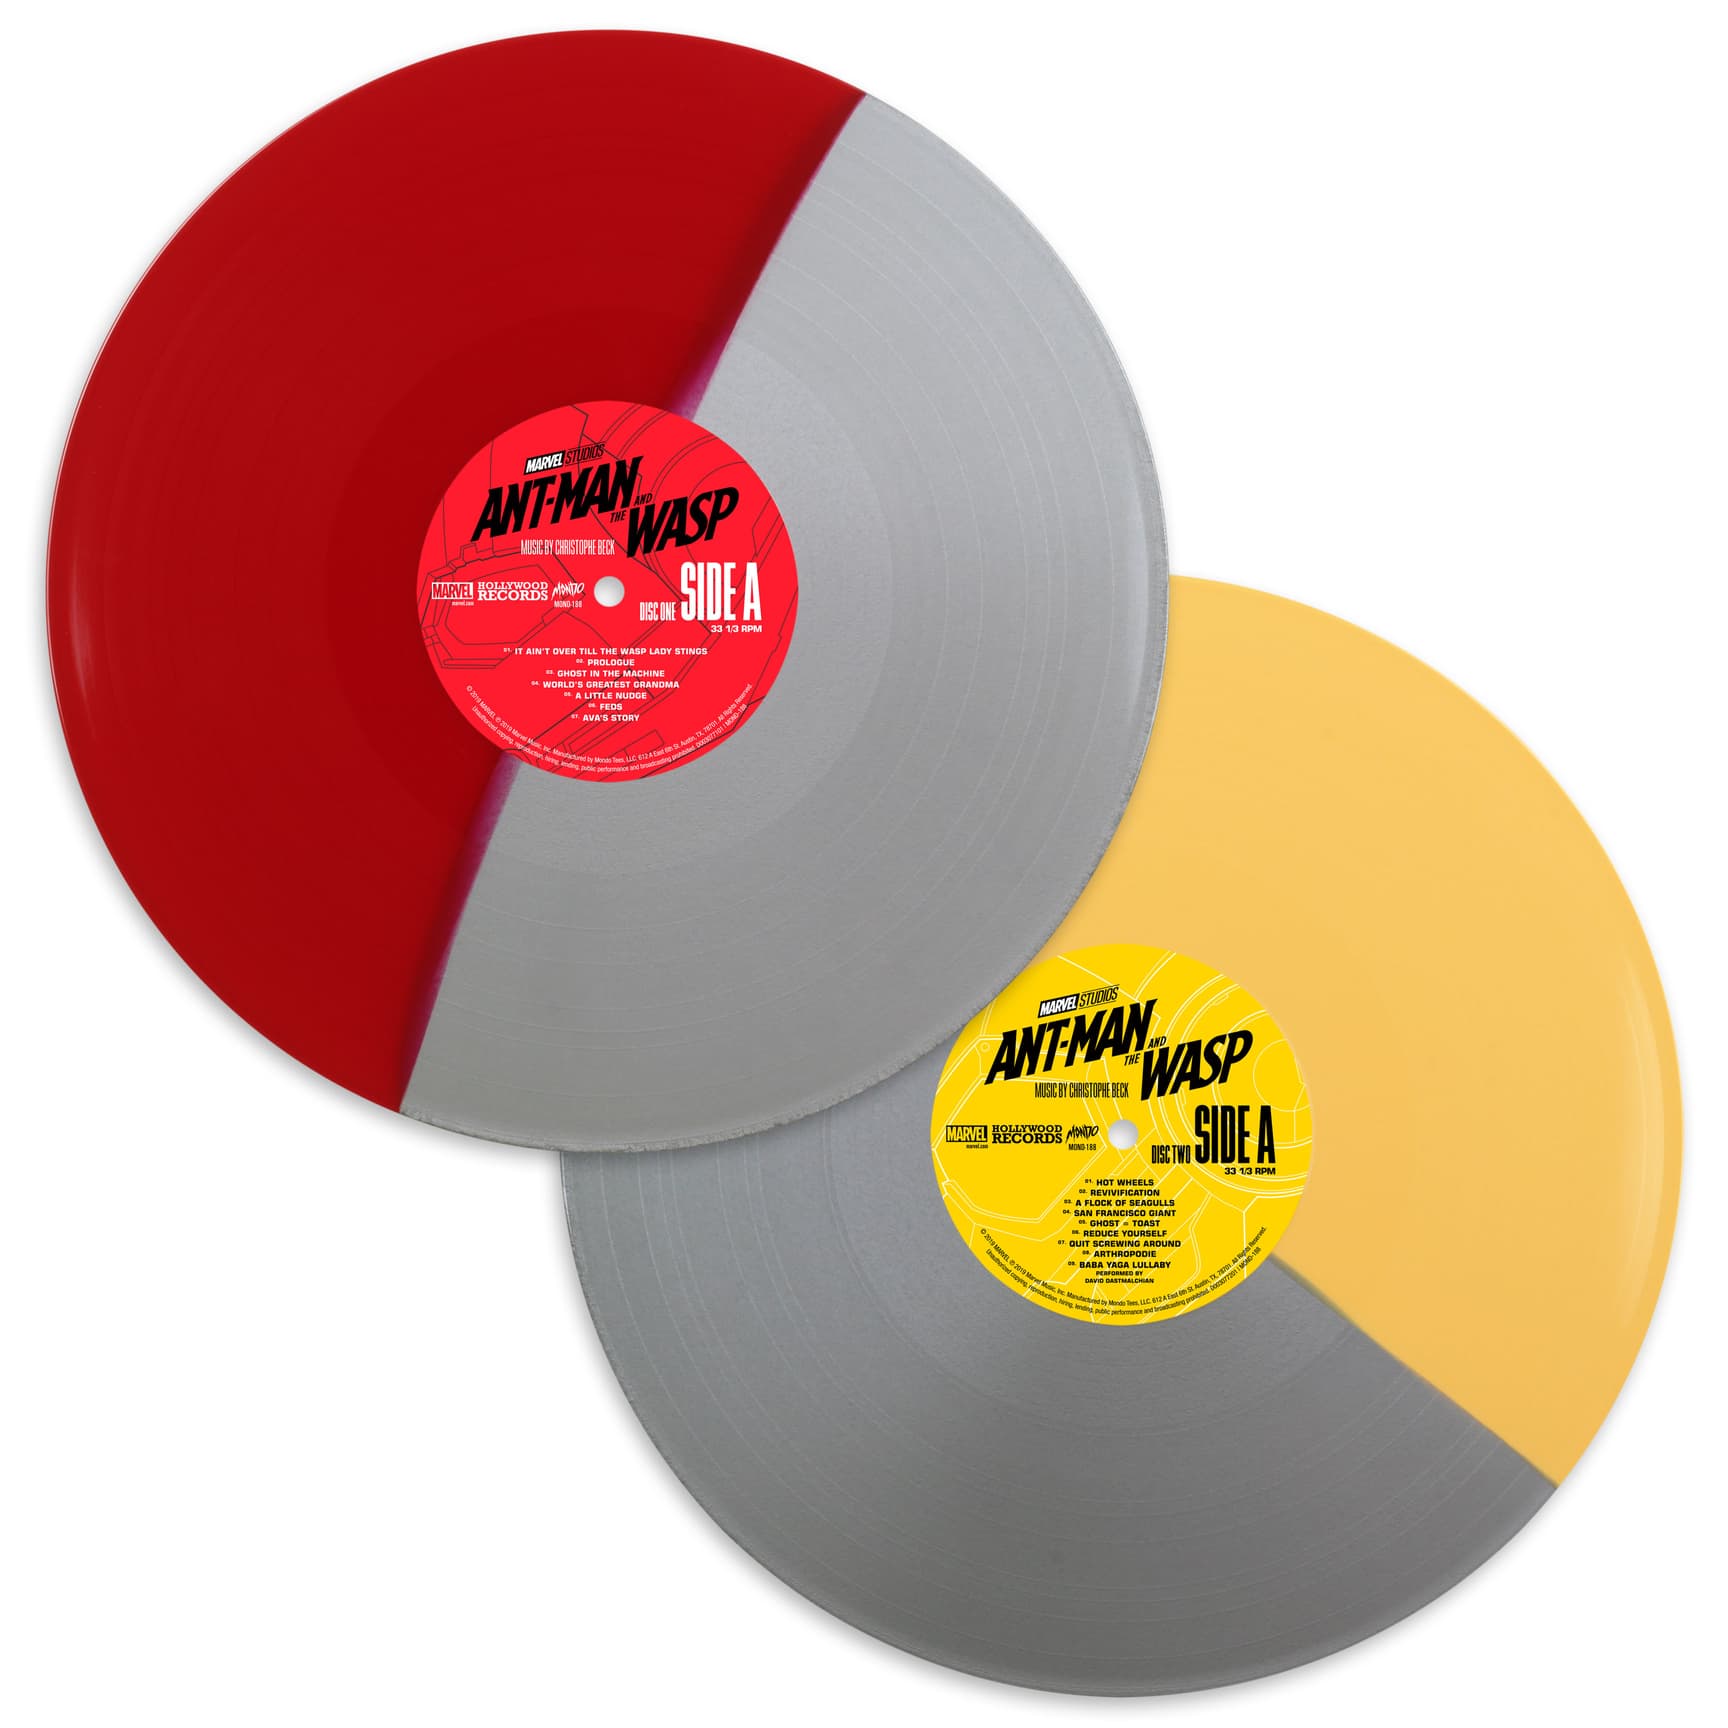 Ant-Man and the Wasp split discs